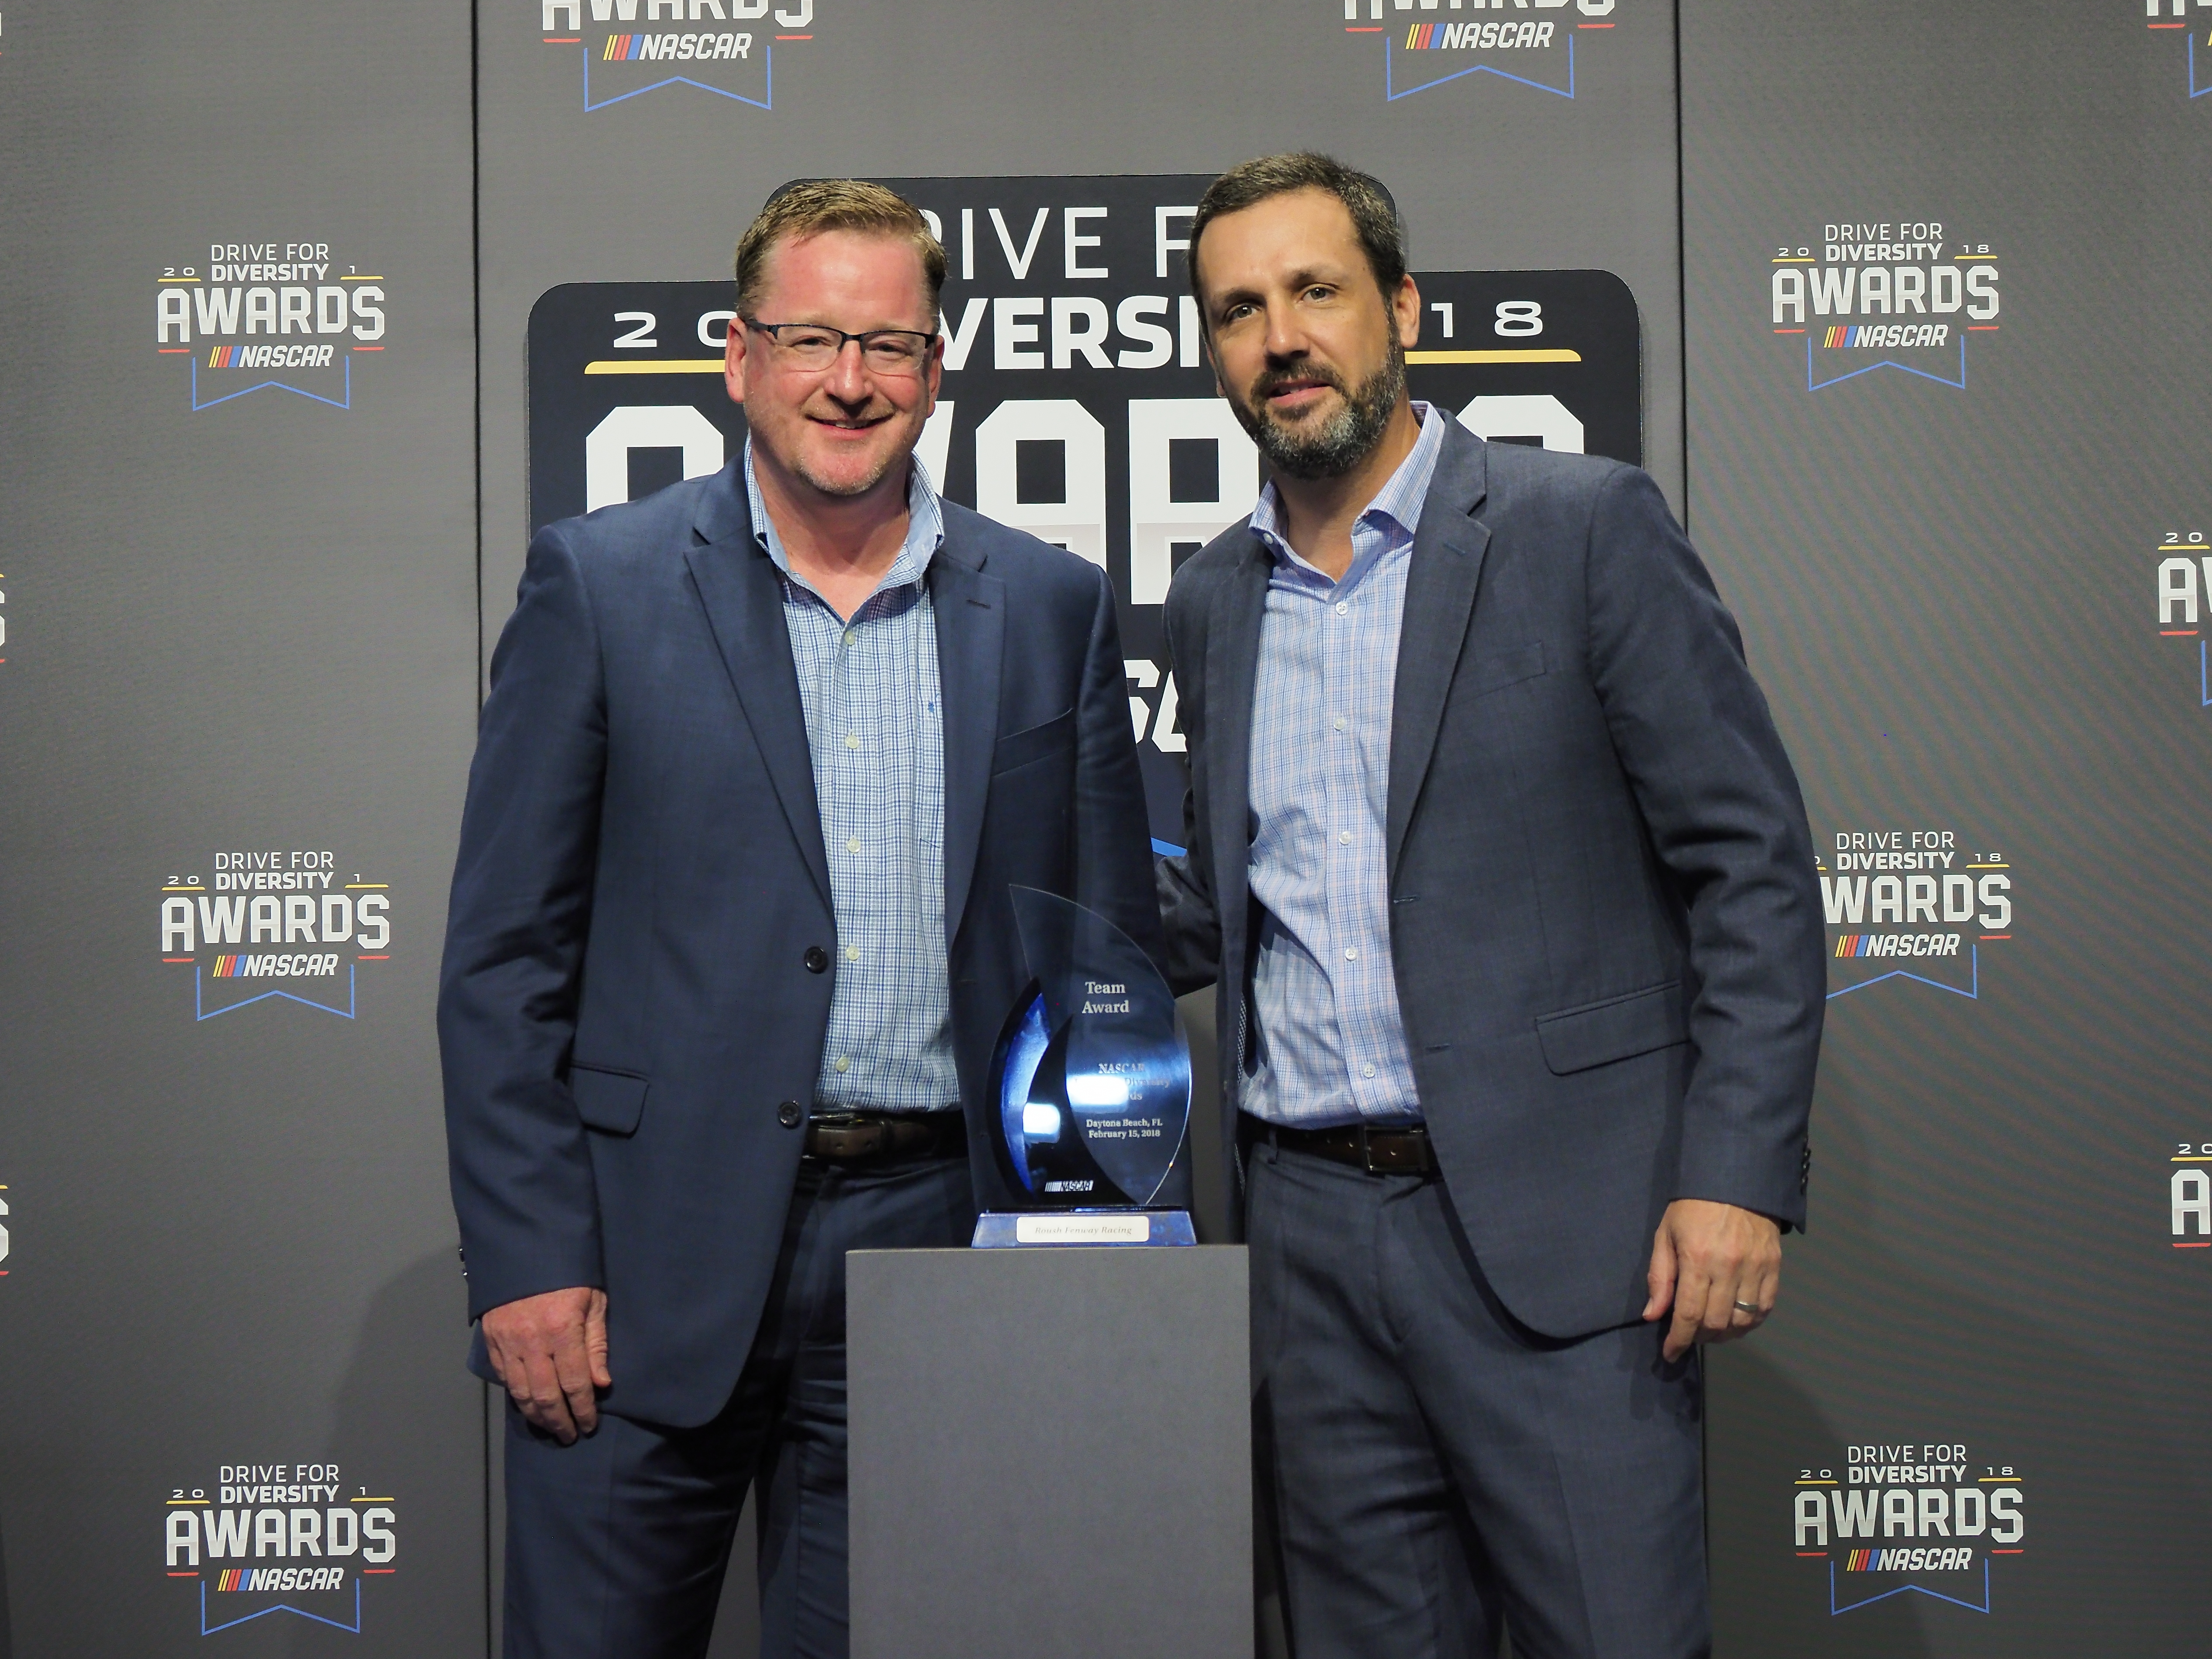 Roush Fenway Racing Honored at 11th Annual NASCAR Drive For Diversity Awards